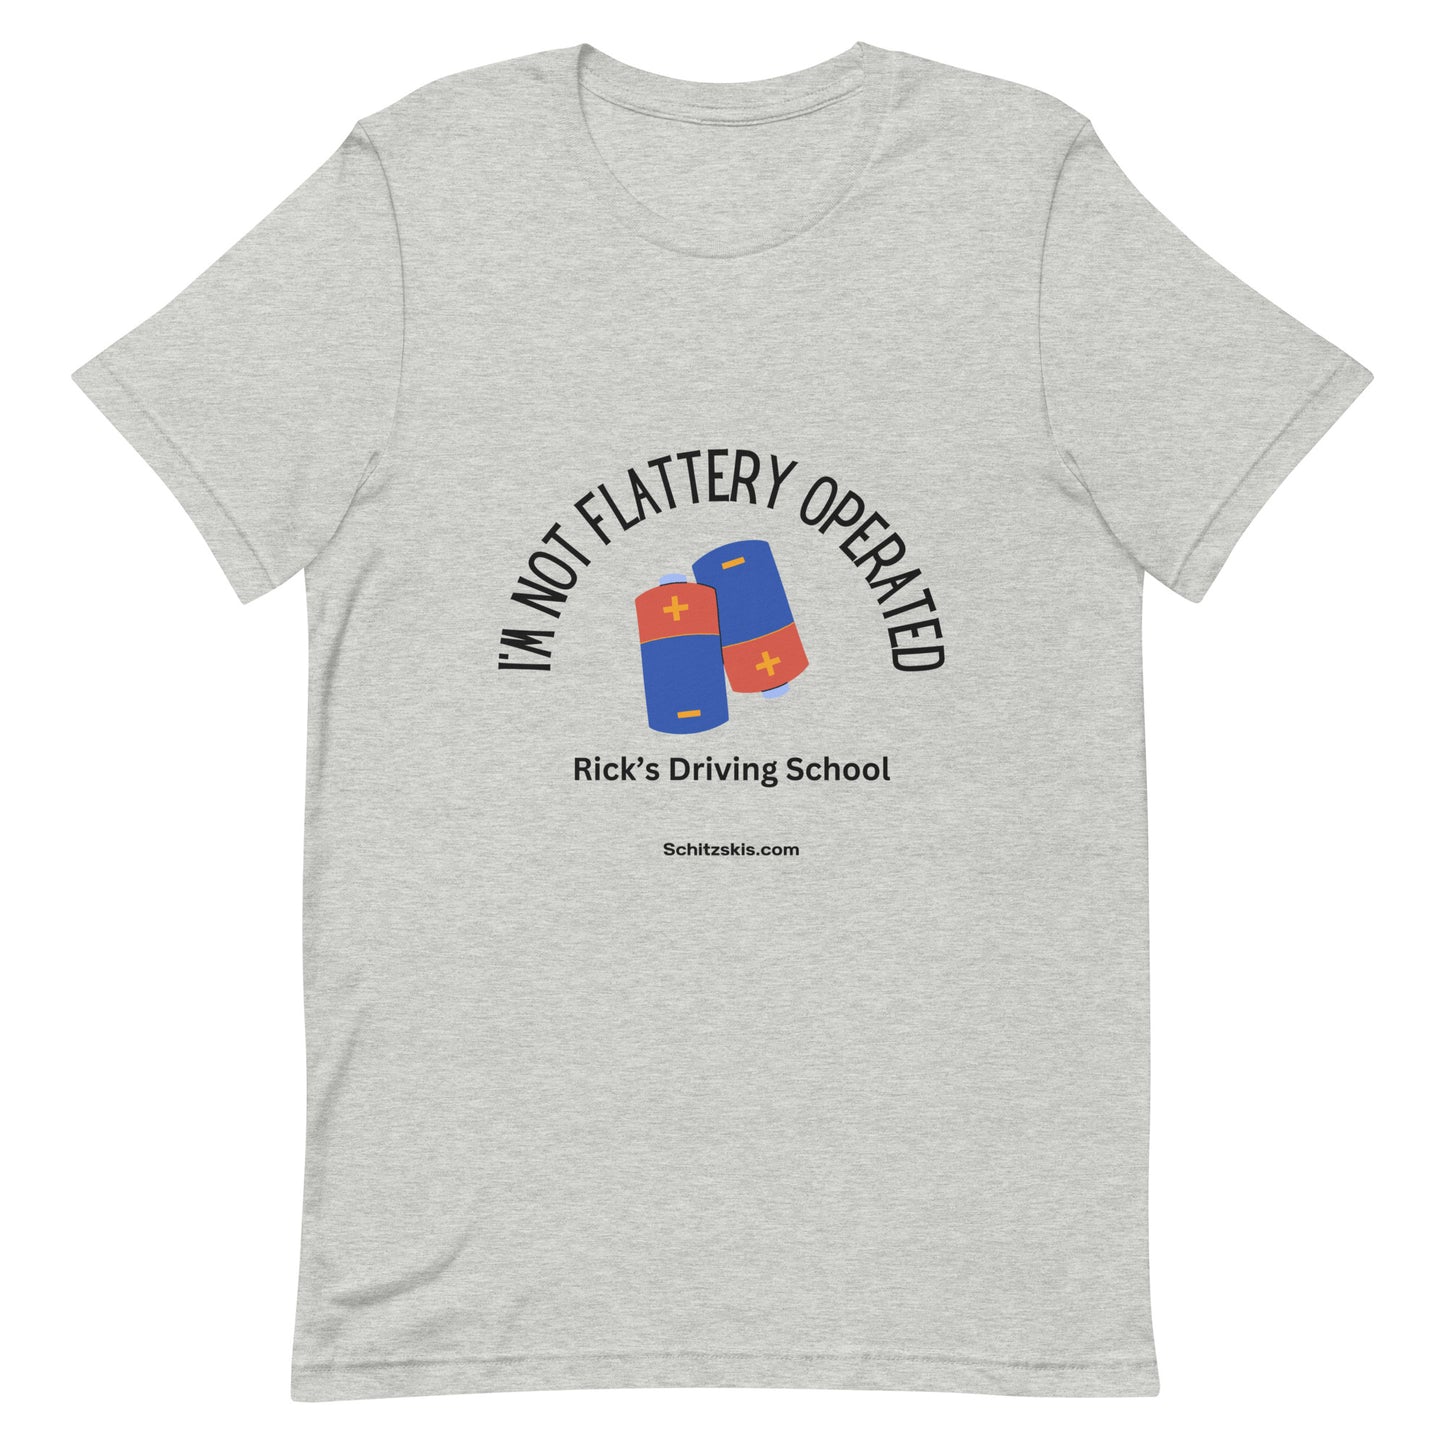 Not Flattery Operated TShirt